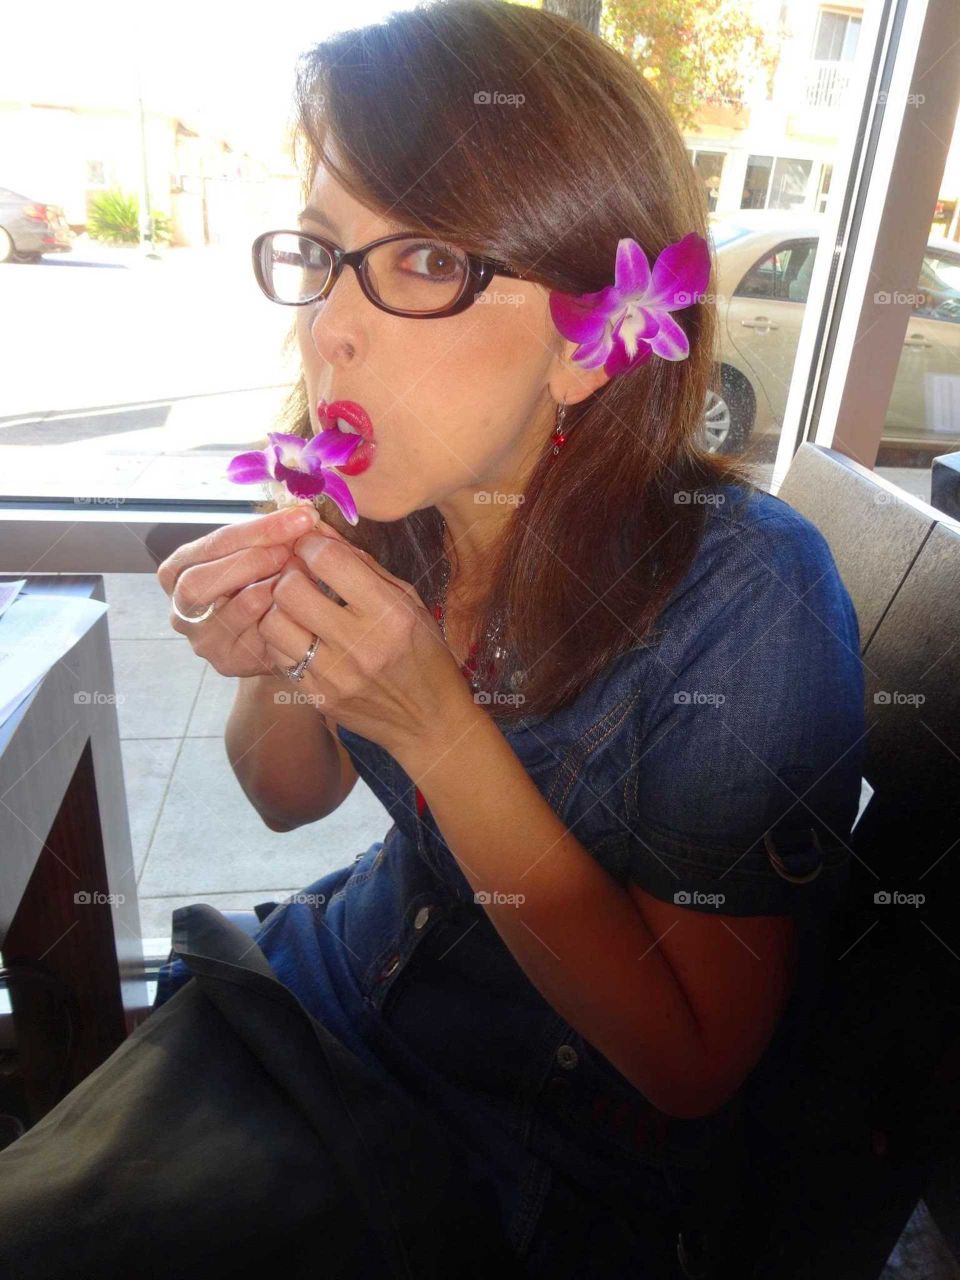 Eating an orchid